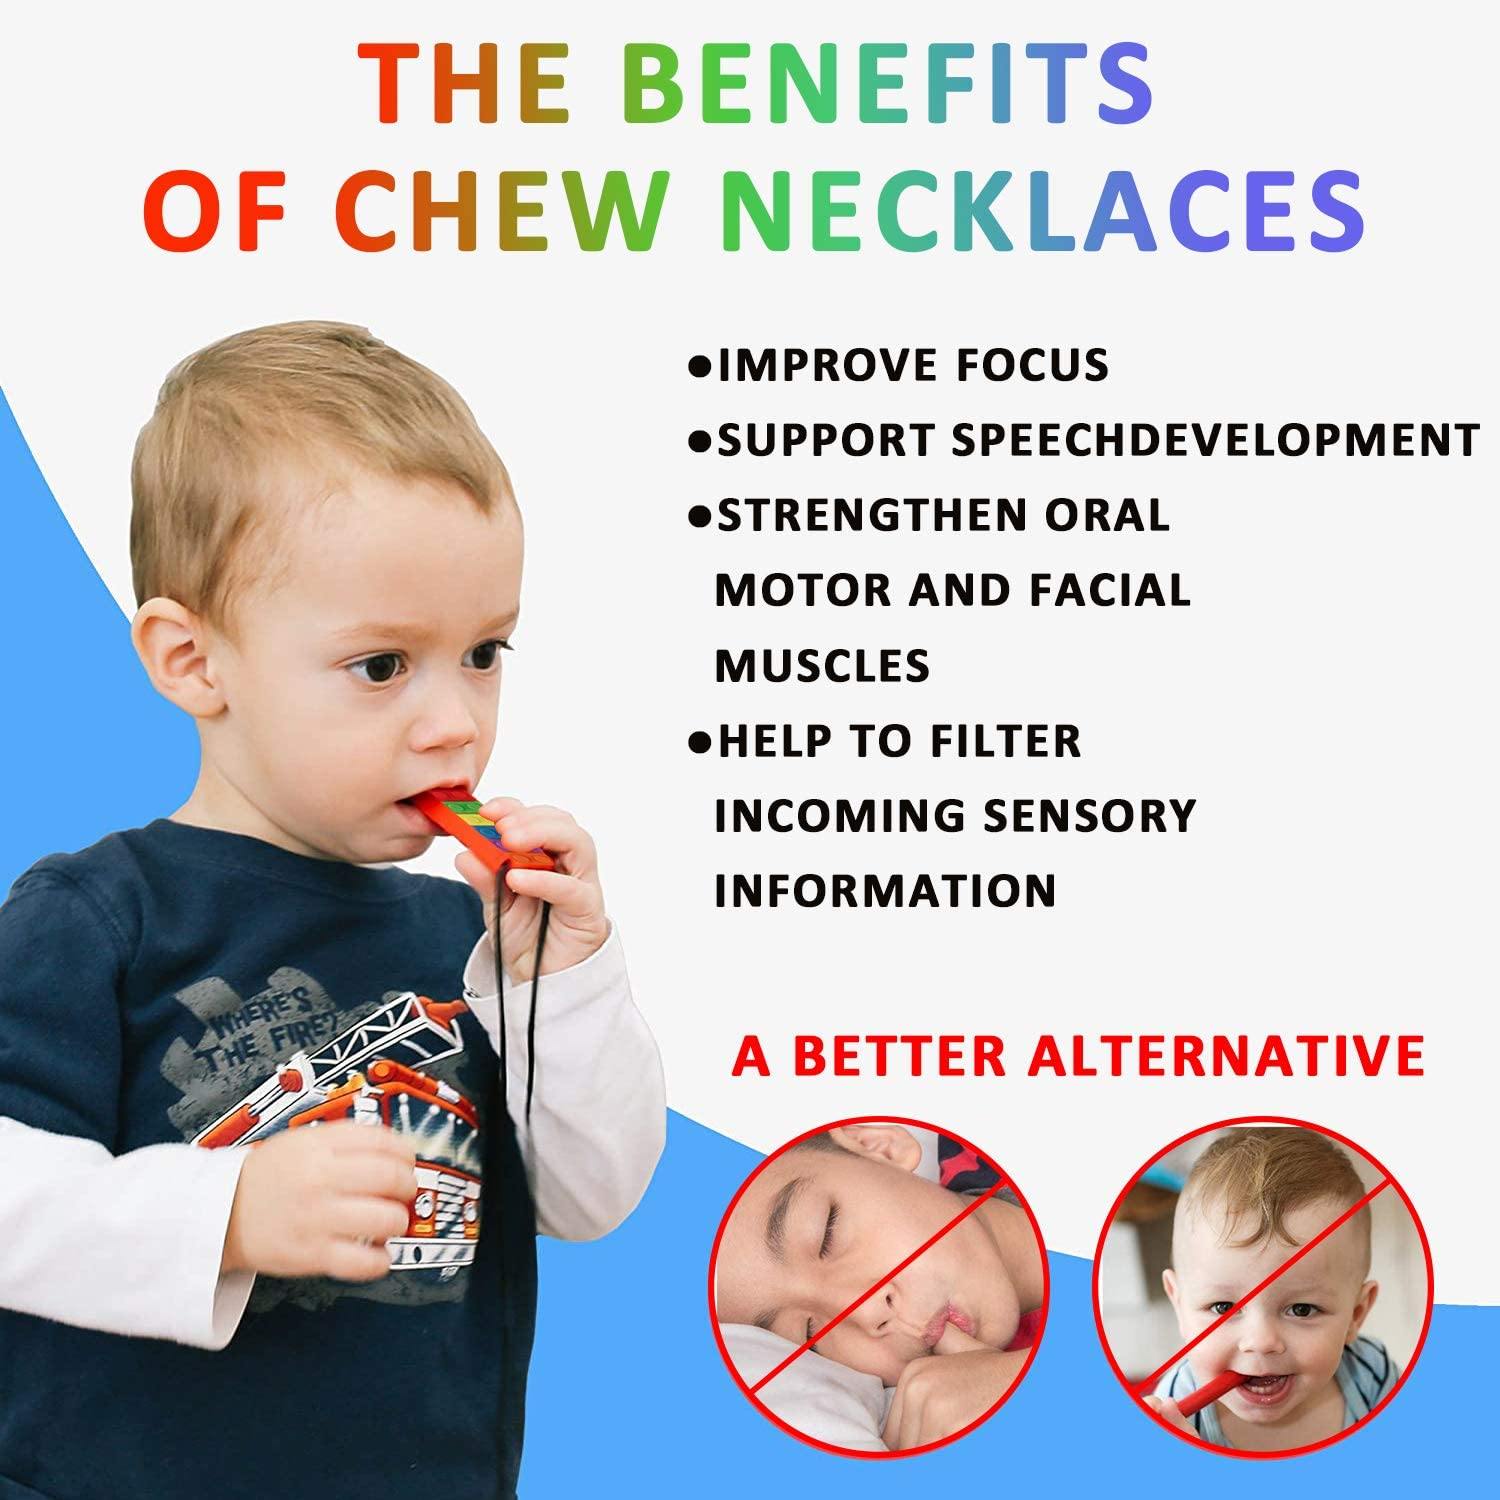 Chew Necklaces For Sensory Kids, 3 Pack Silicone Oral Motor Aids Chewy  Necklace Sensory For Autism, Adhd, Anxiety Or Other Special Needs- Reduces  Chew | Fruugo BH